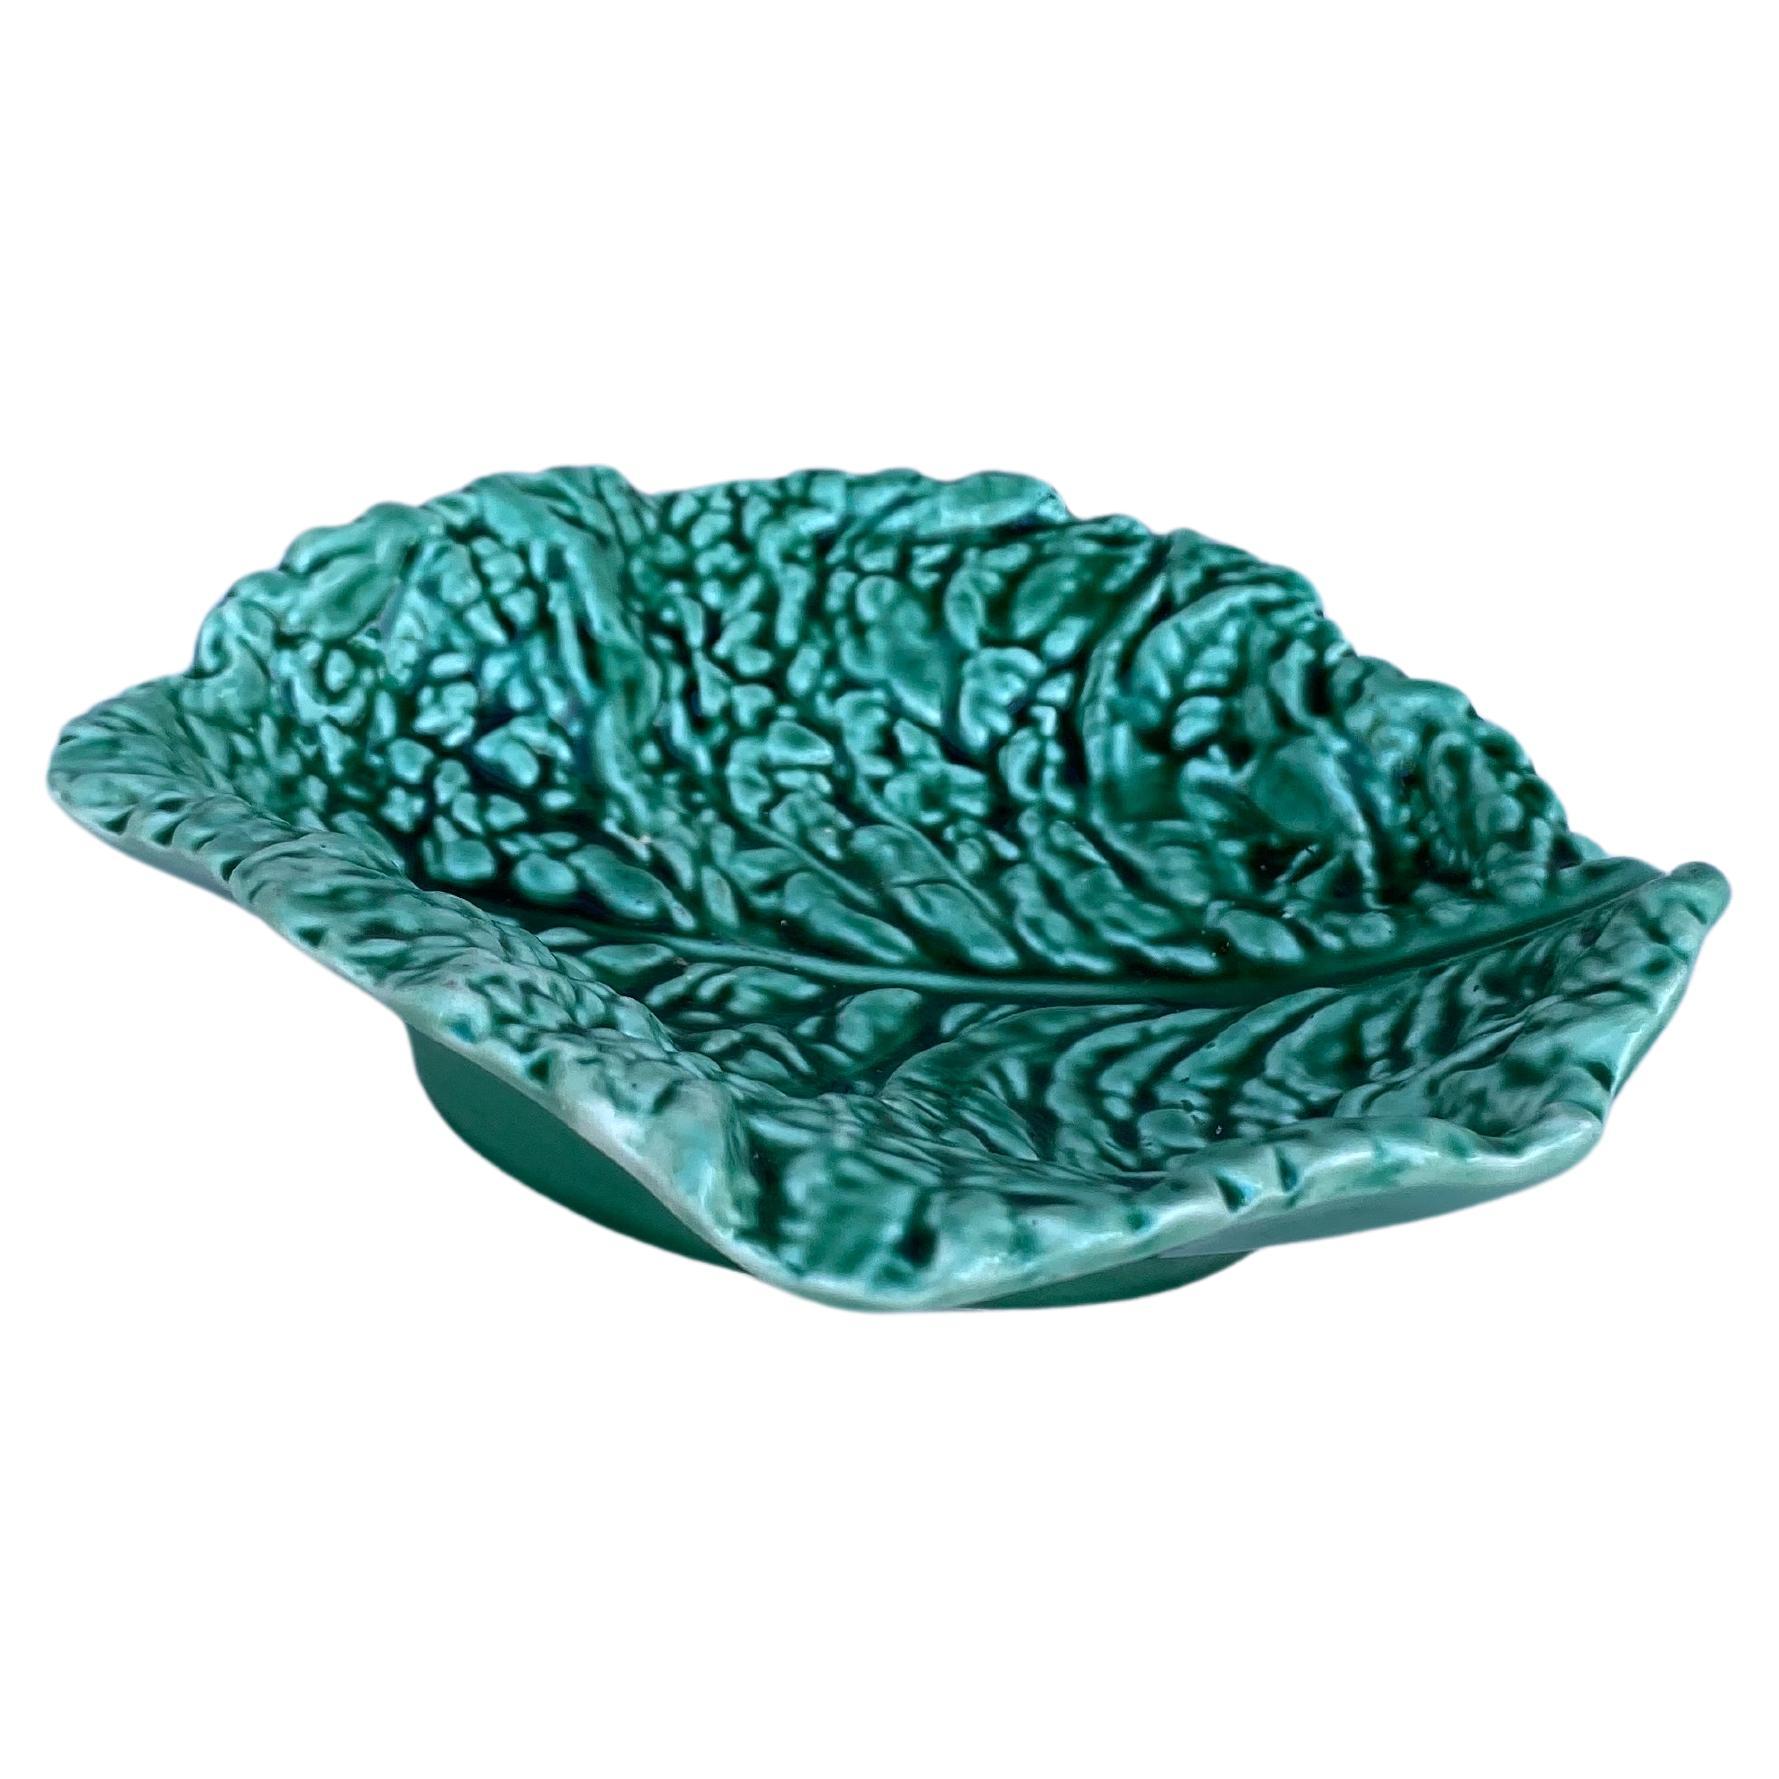 Majolica green cabbage leaf platter Sarreguemines, circa 1930.
Measures: 6.5 inches by 6.3 inches.